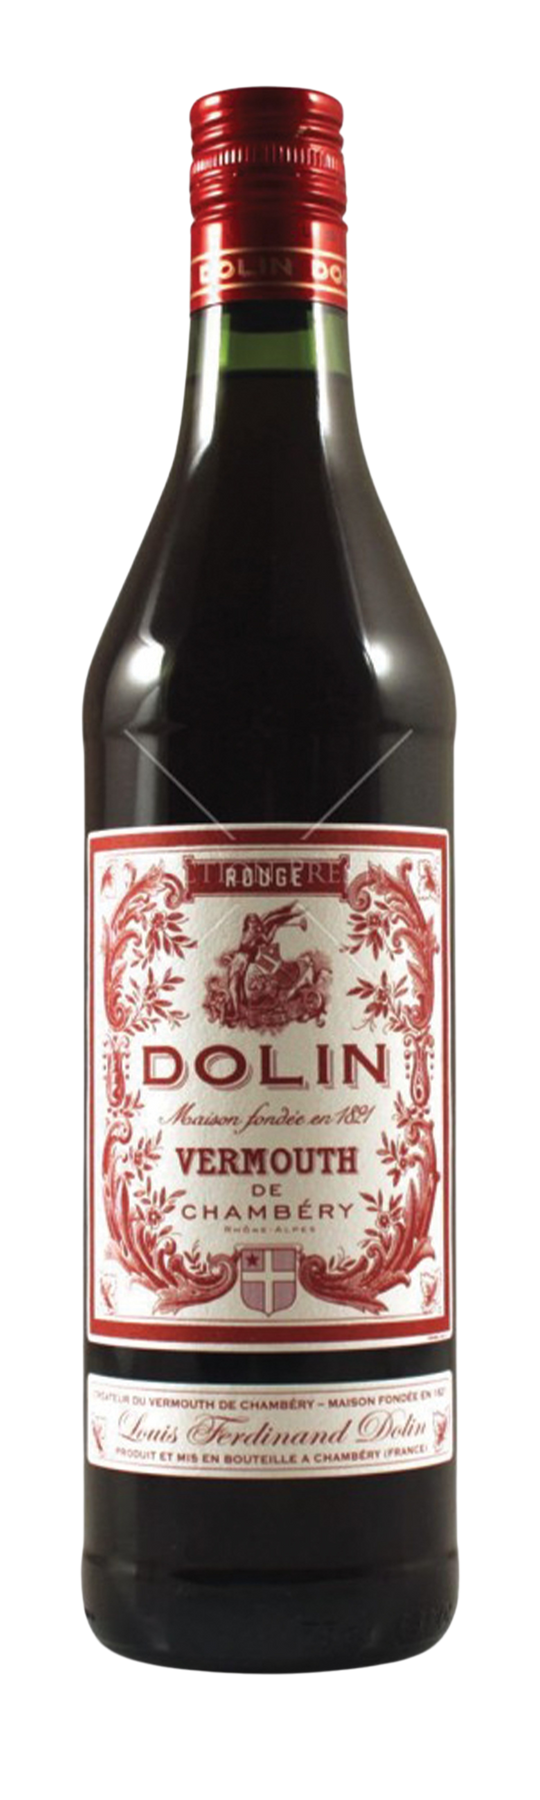 Dolin Rouge 16% 75cl Vermouth de Chambéry